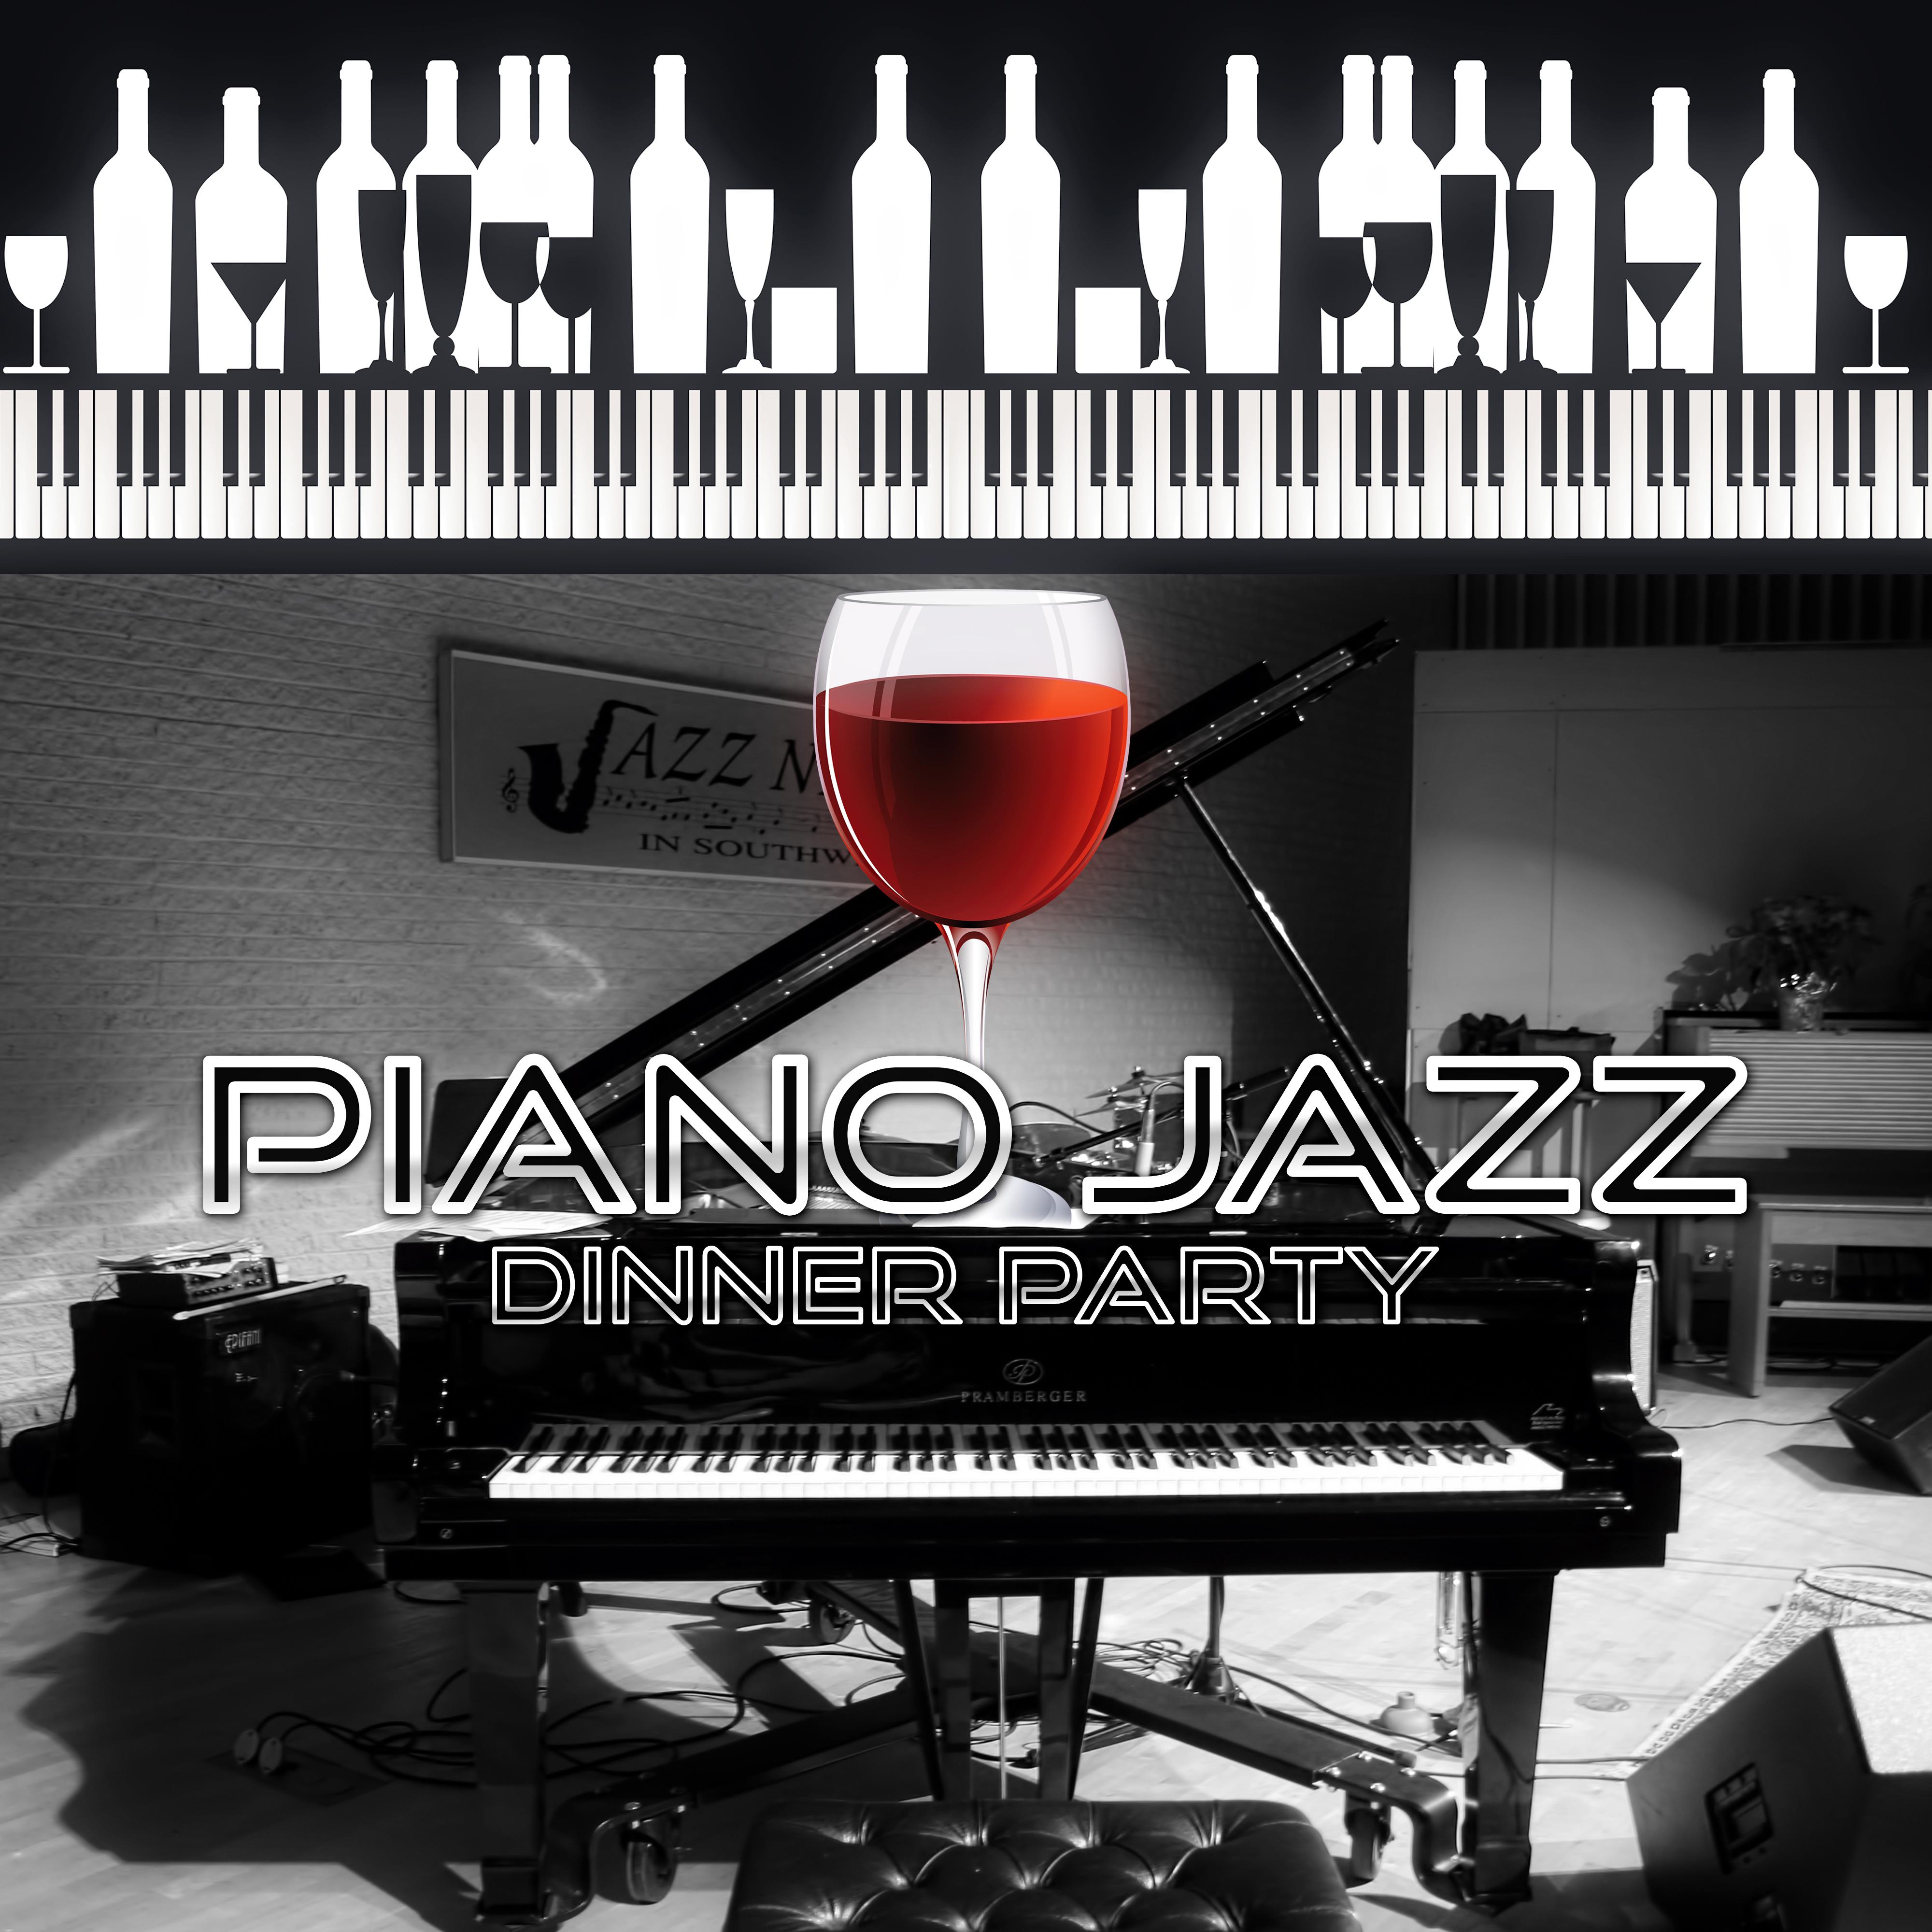 Piano Jazz - Instrumental Music, Most Relaxing Piano in the Universe, Wedding Ceremony Music, Wedding Reception Romantic Music, Background Music for Dinner Party